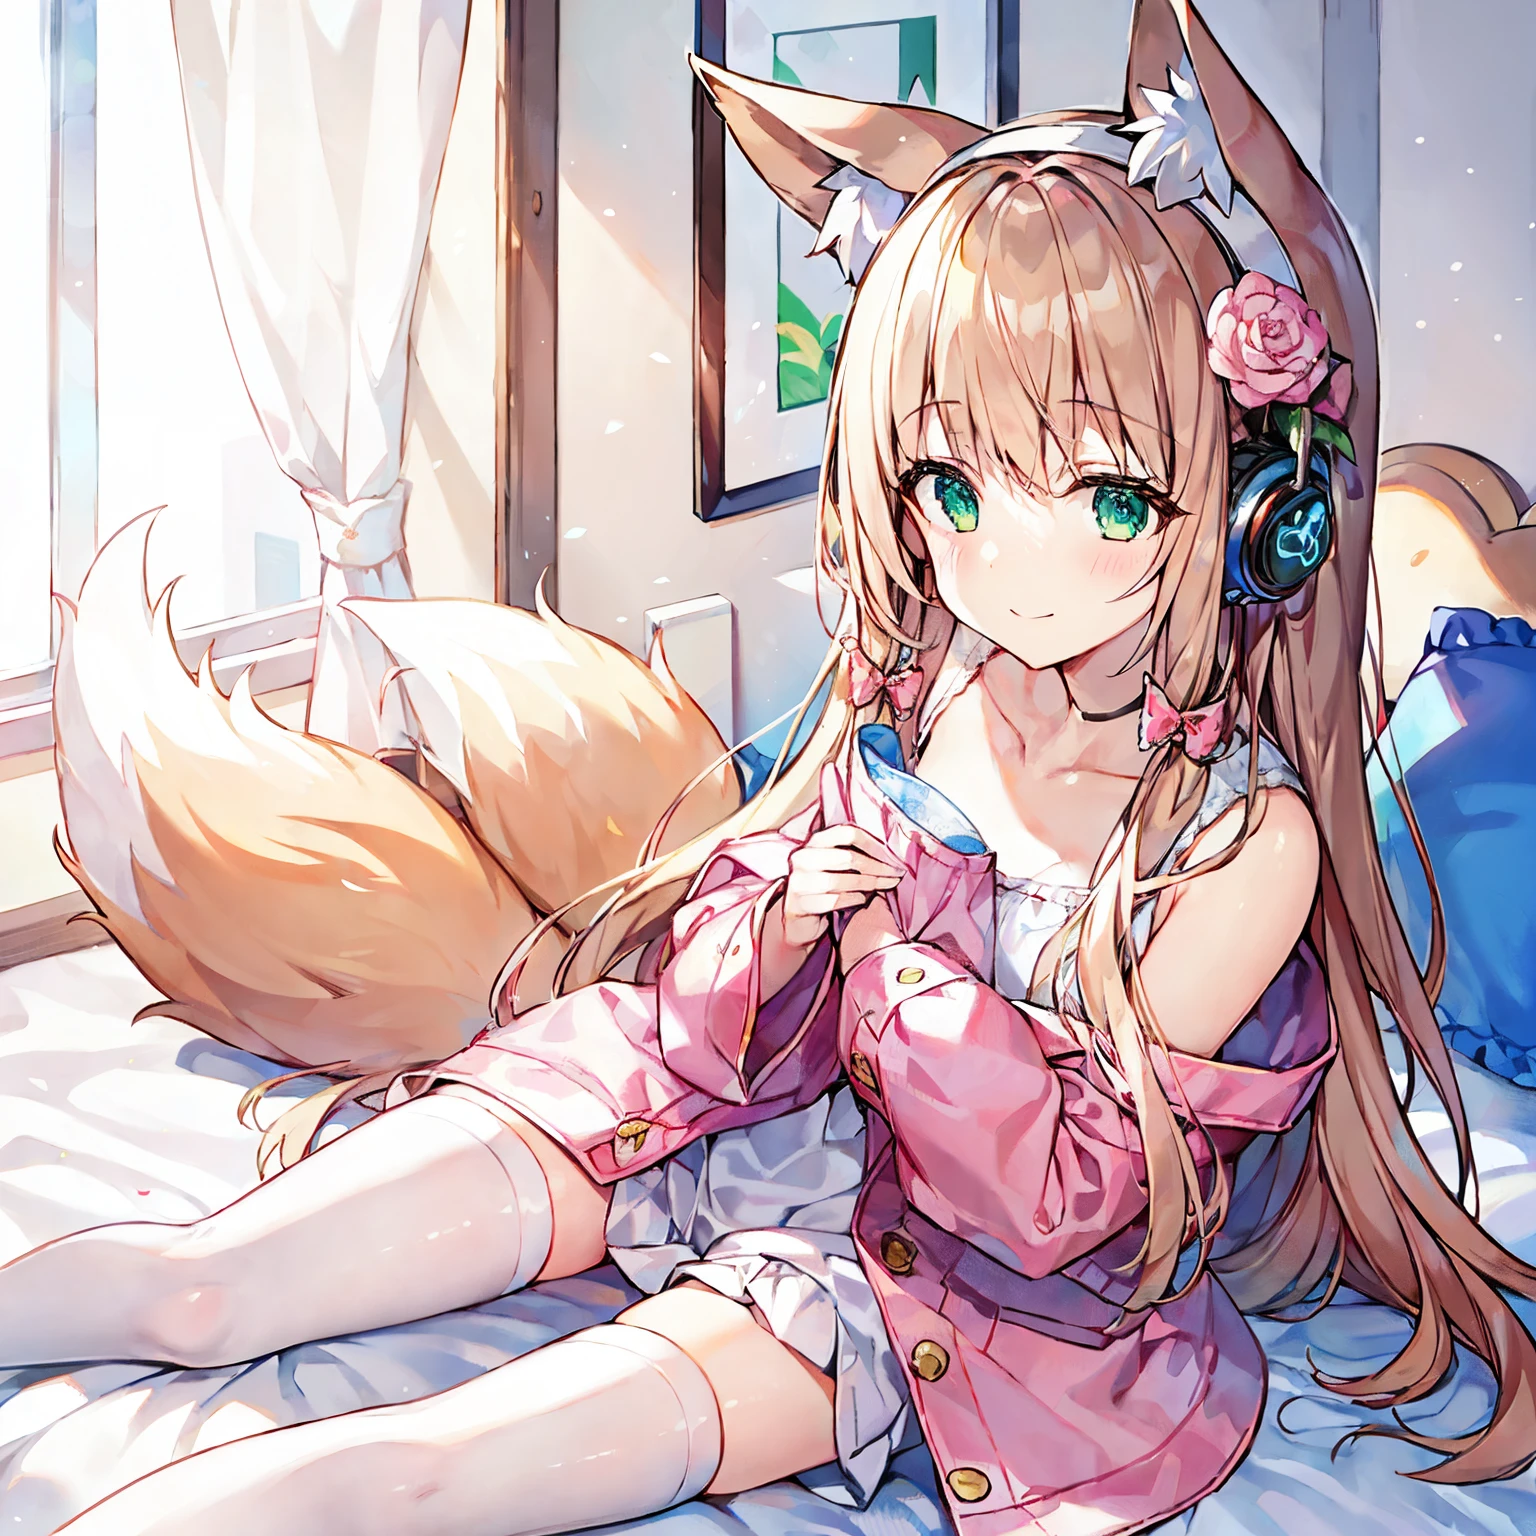 (tmasterpiece, Best quality, A high resolution,8k), 1 girl, alone, Oversized fox tail，Green-eyed，(Long brown hair)，Small flower headdress, (16 yaers old_high school senior)，Moro Liberation Front，At home，sitting down on the floor_Leaning against the side of the bed，Wear the headphones on your head，Holding a pillow，Wearing pink pajamas，White stockings，Quilt internal inspection，